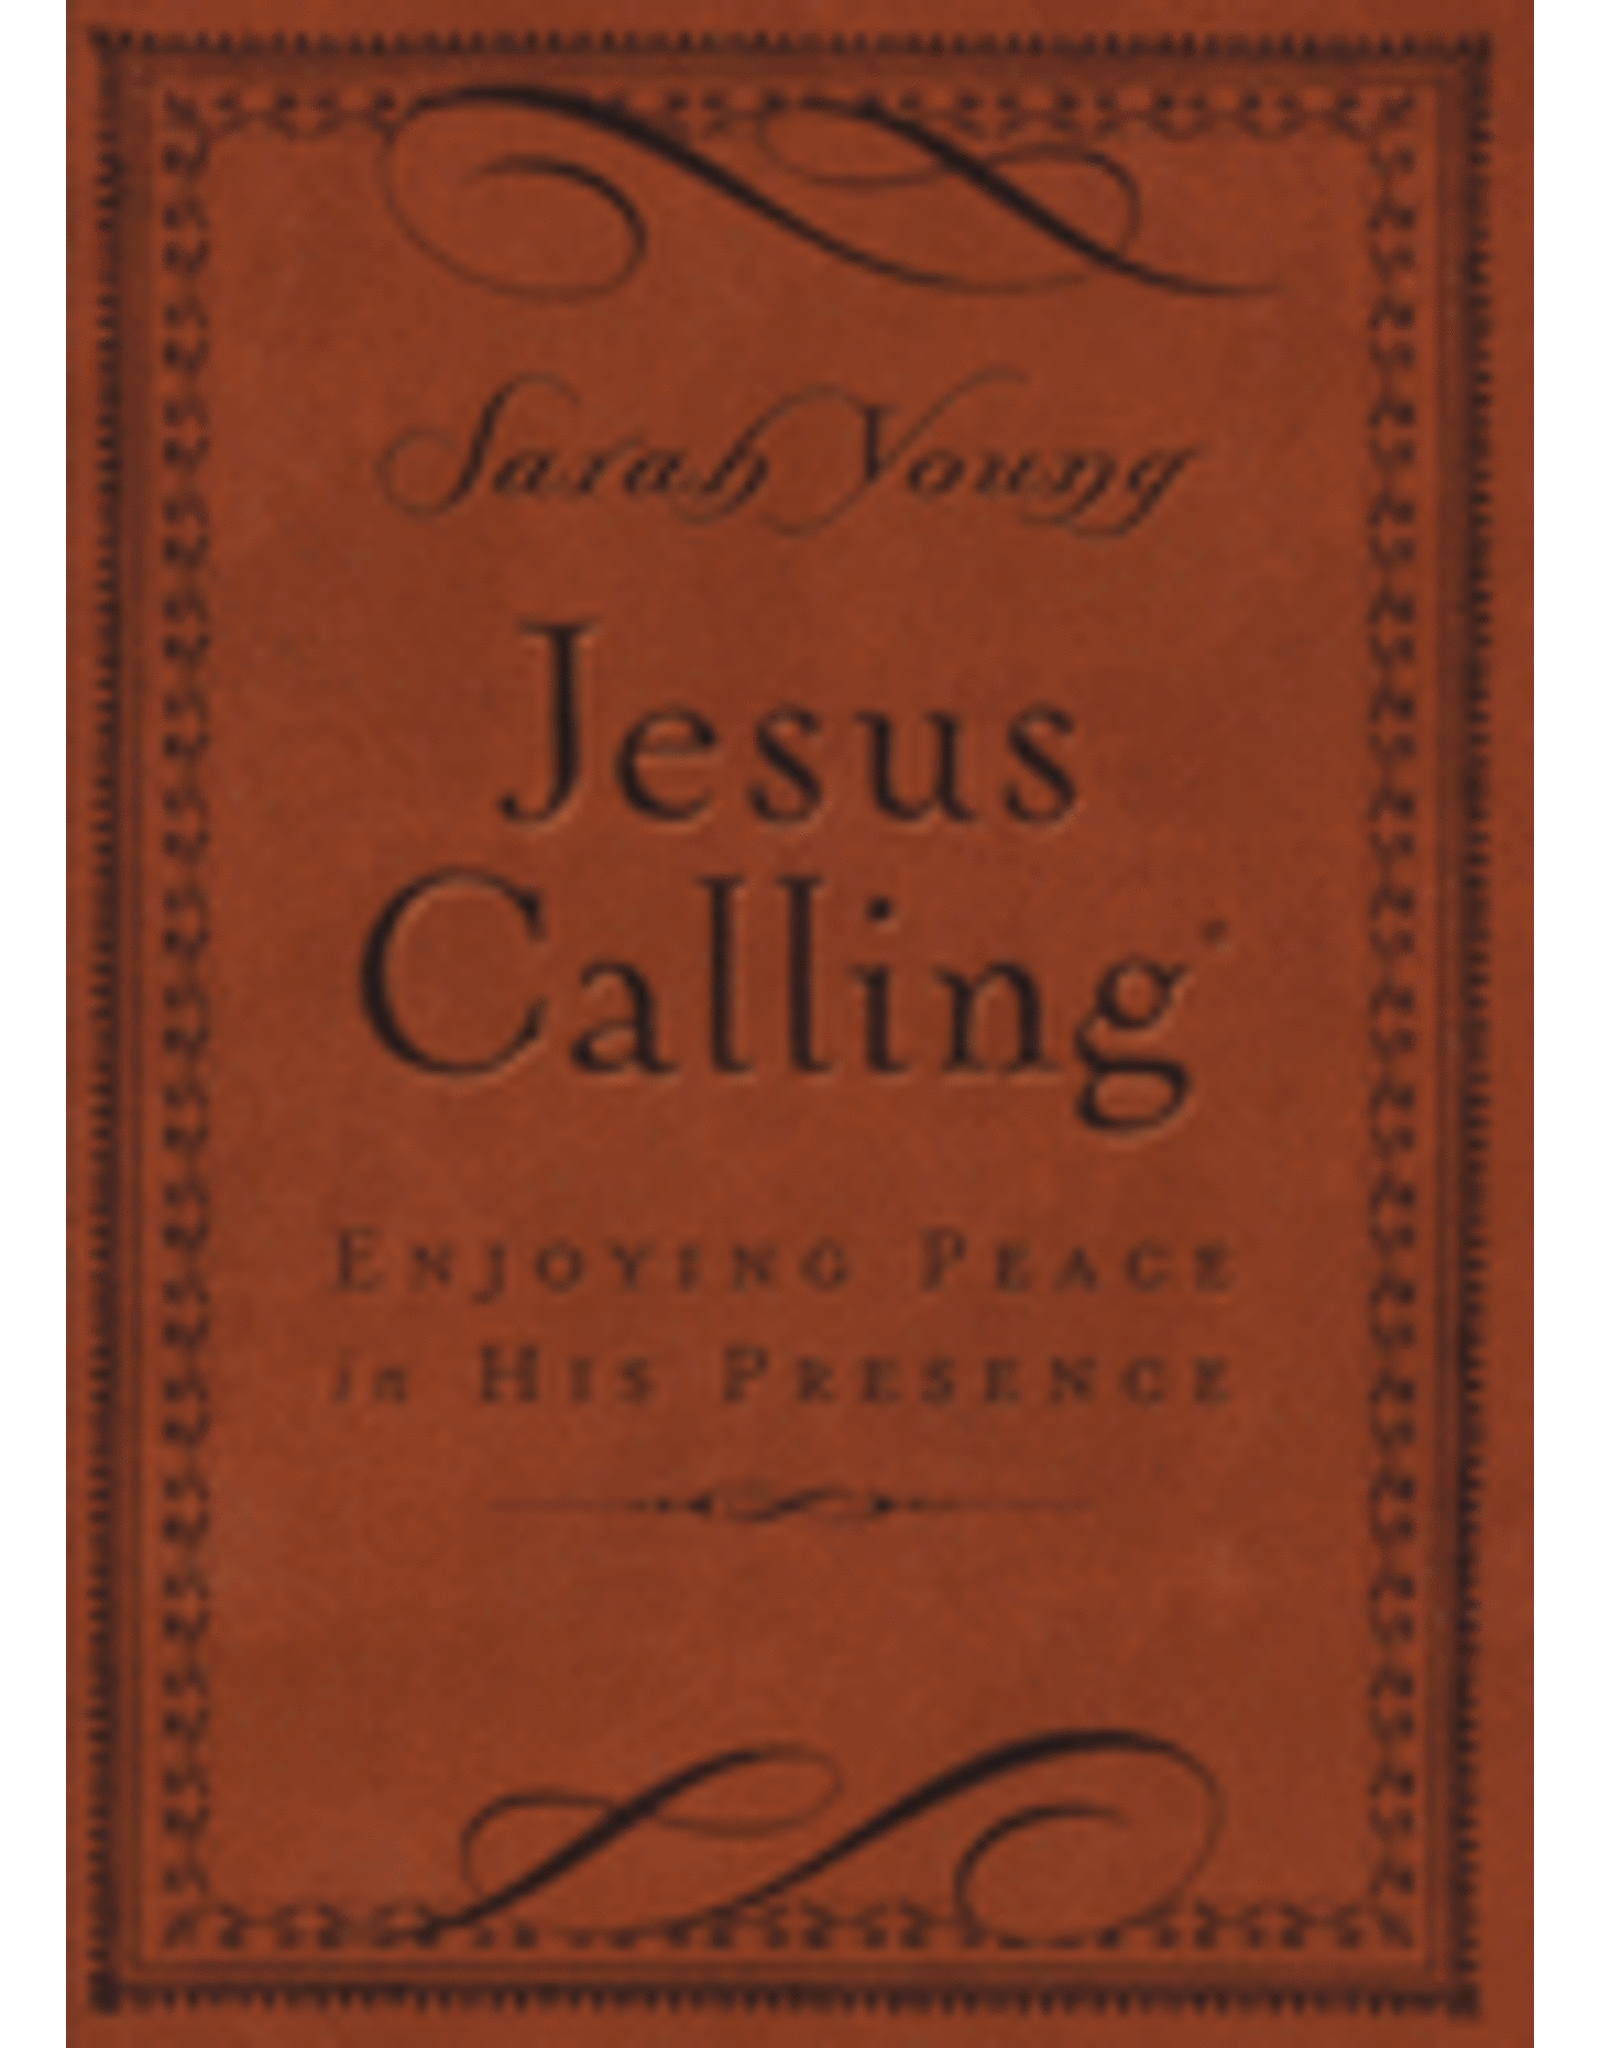 Jesus Calling (Brown Leather)